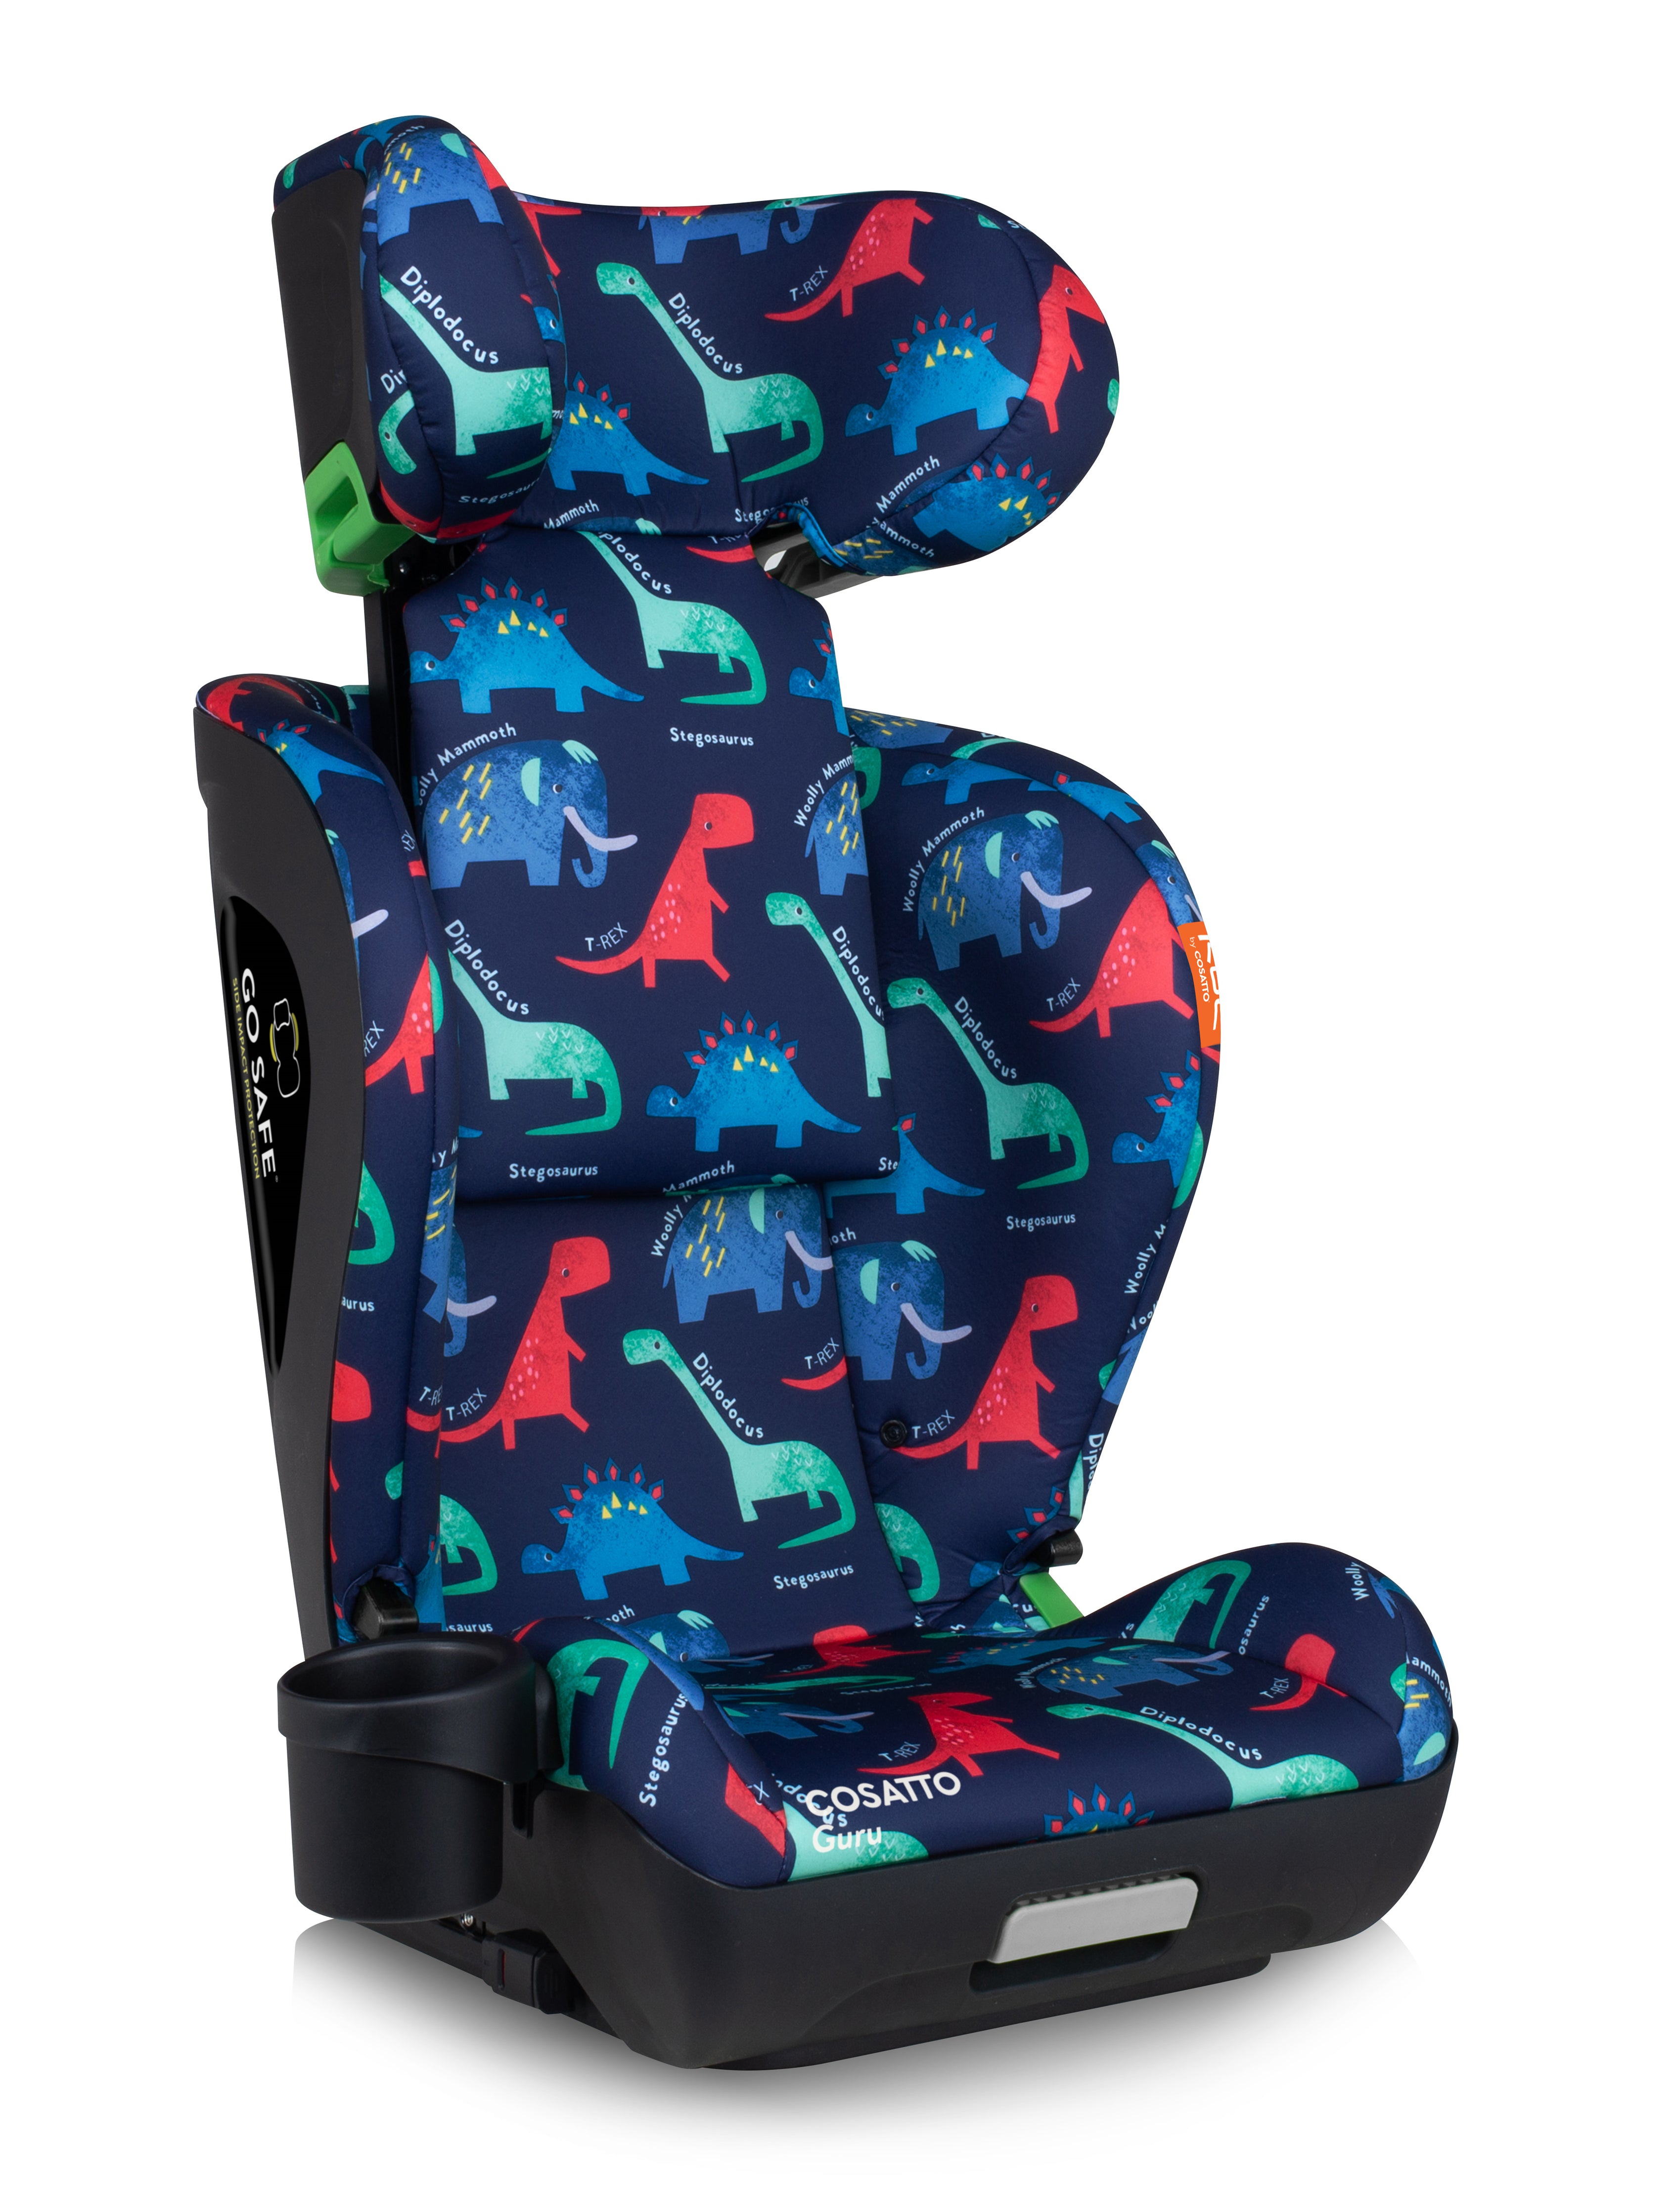 Guru i-Size Car Seat D is for Dino